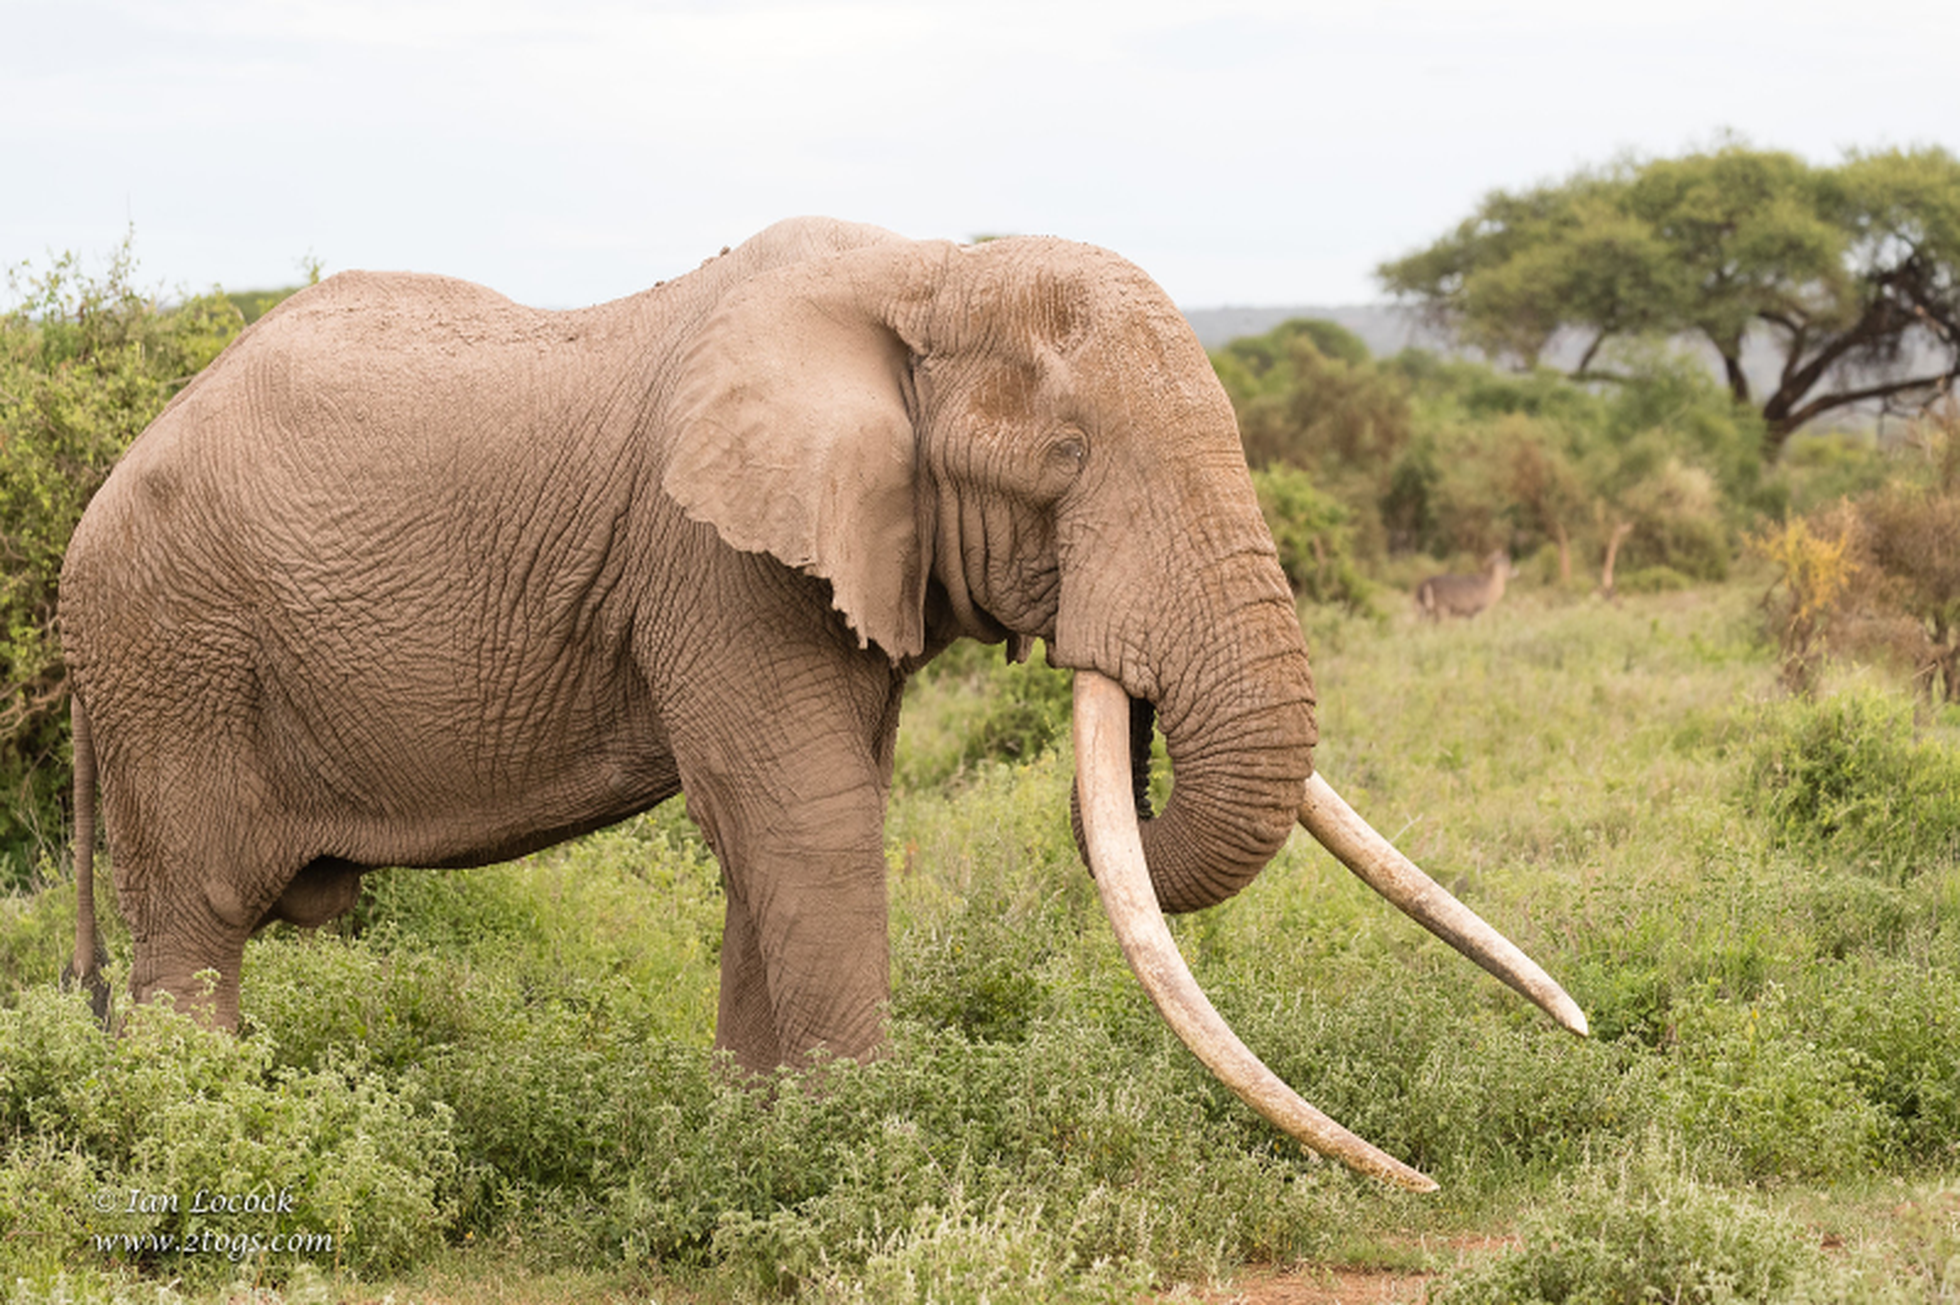 The last of Africa's big tusker elephants – in pictures, Environment